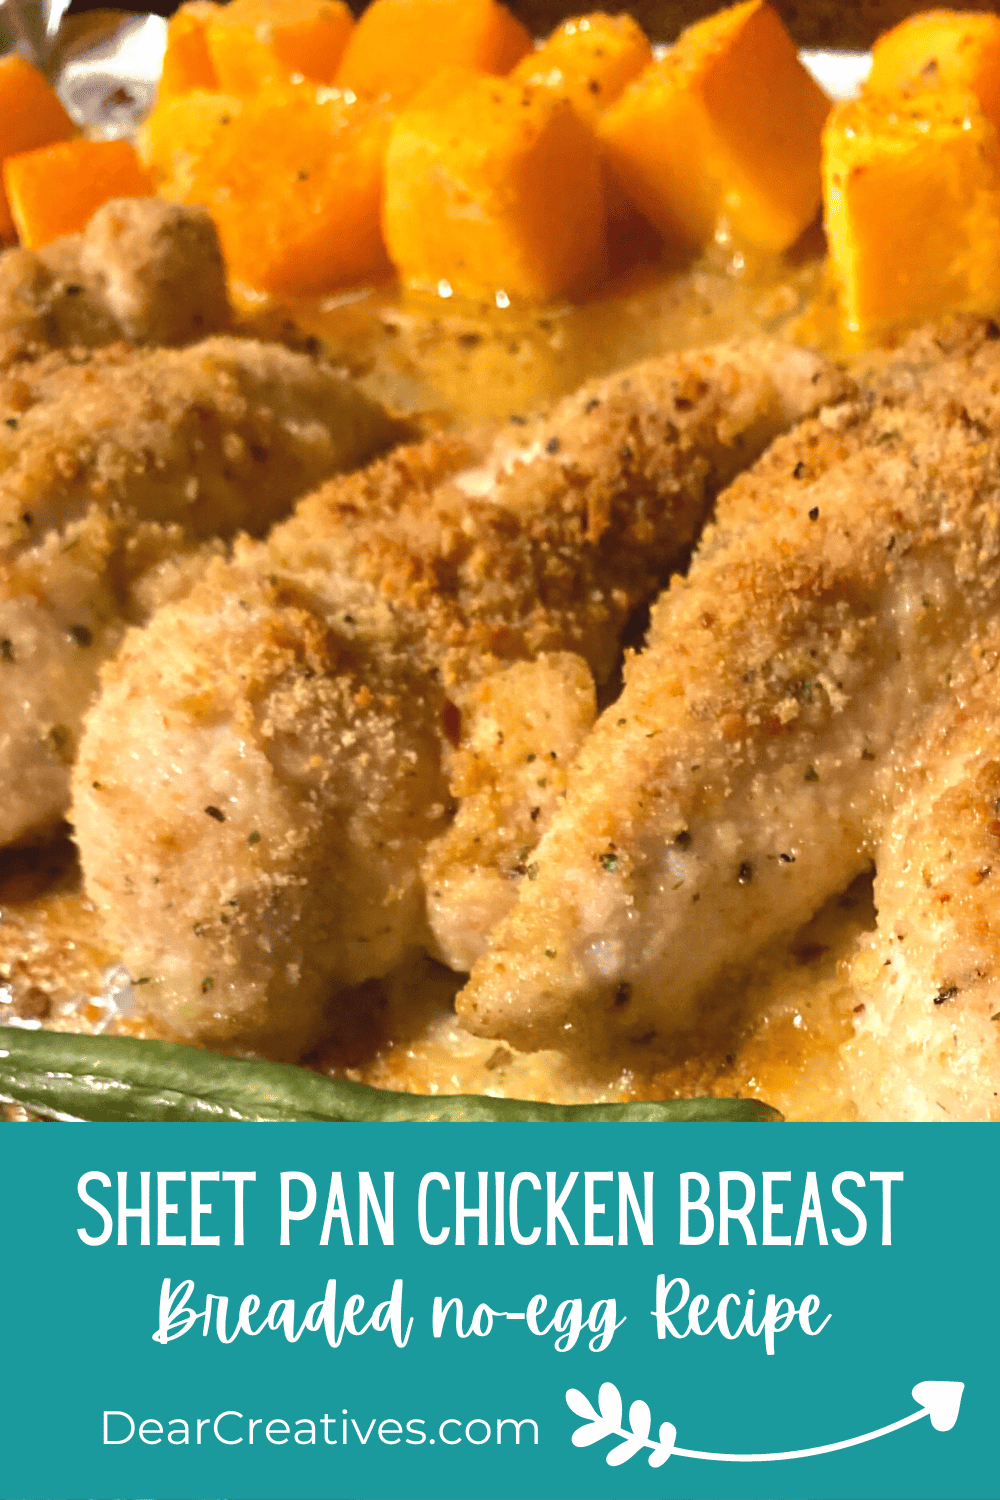 Sheet Pan Breaded Chicken Breasts - Make this with or without vegetables at the same time. Get the Recipe at DearCreatives.com